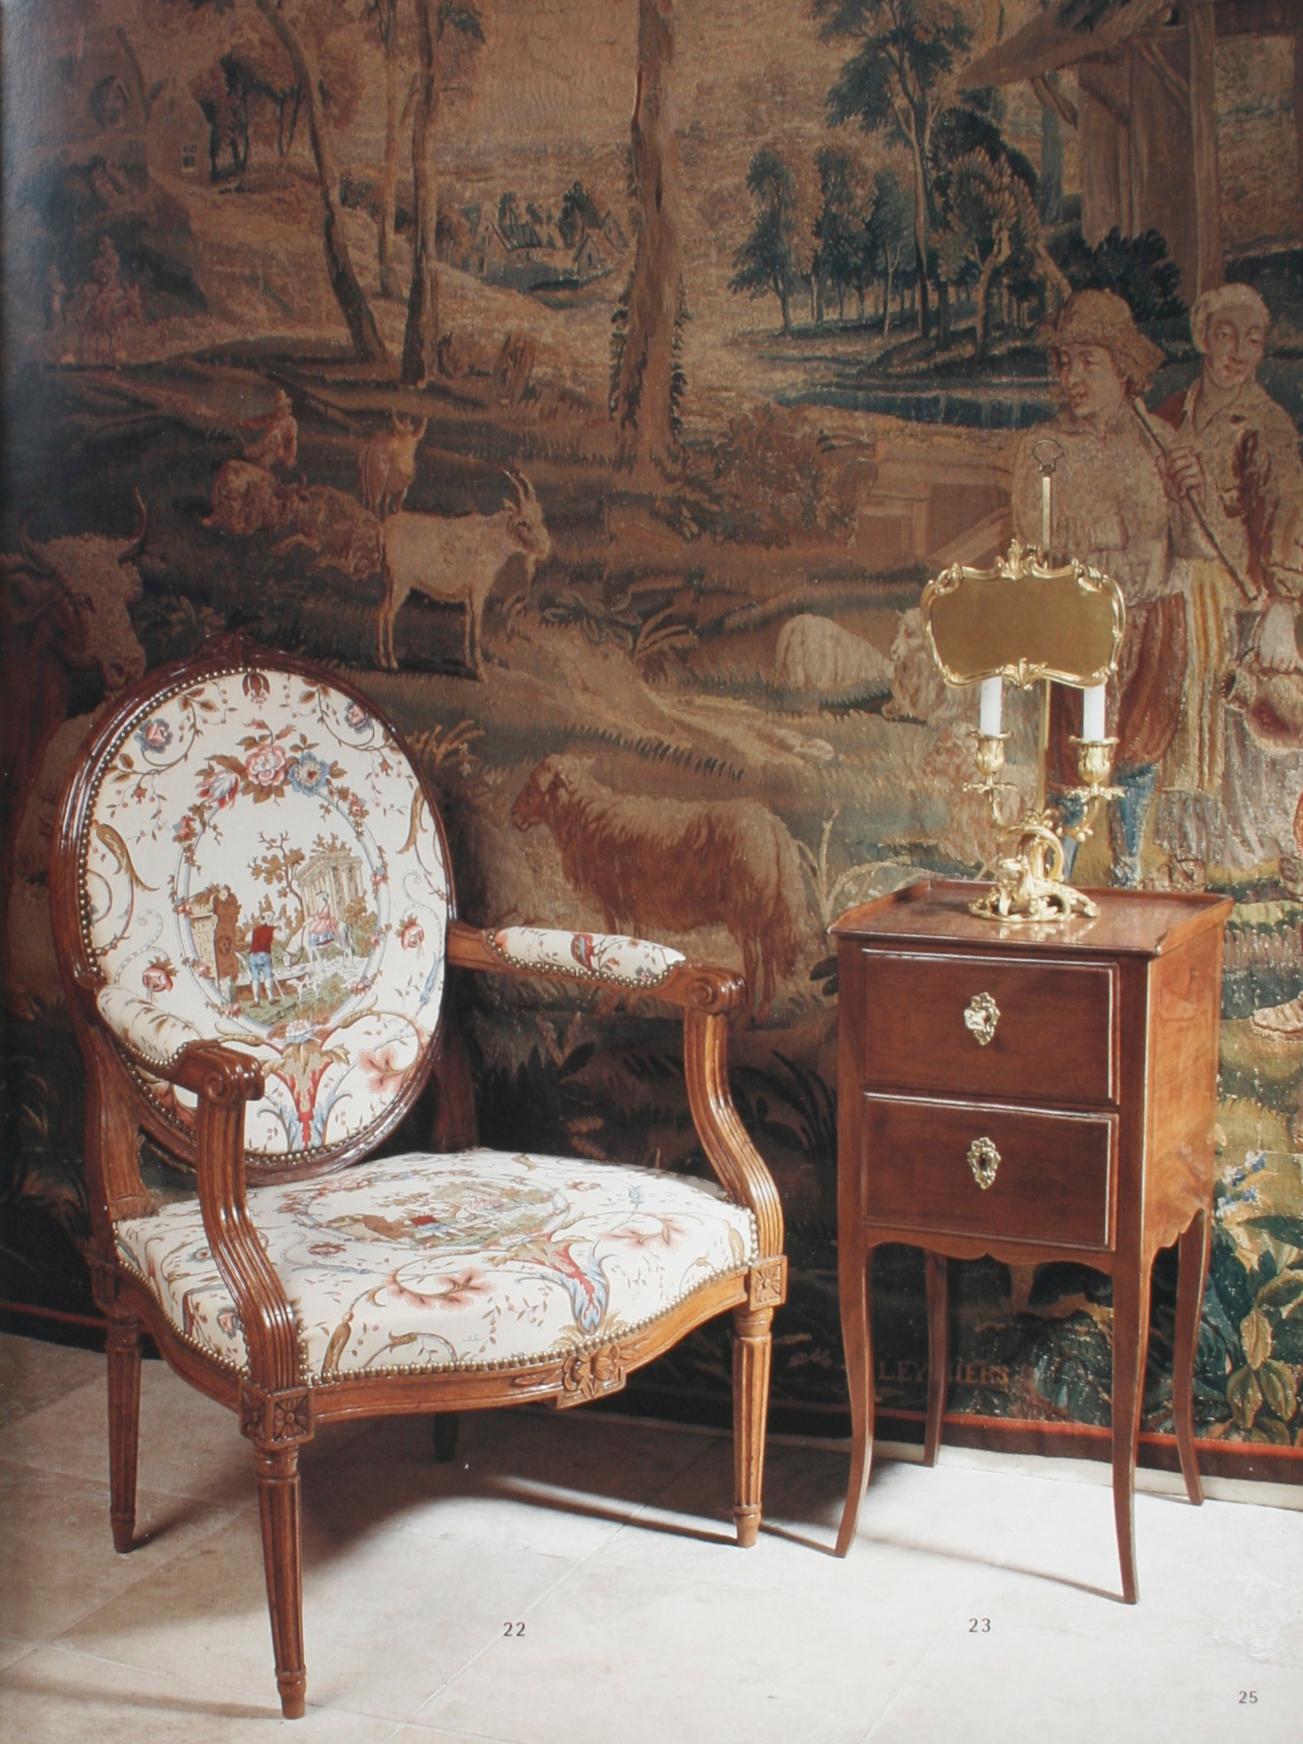 Christies, April 2002 French furniture and decorative arts, A & C fink collections, Sydney. 172 lots all in color, on 139 pages. With results.
NPT Books a division of N.P. Trent Antiques has a large collection of used and out of print books on art,